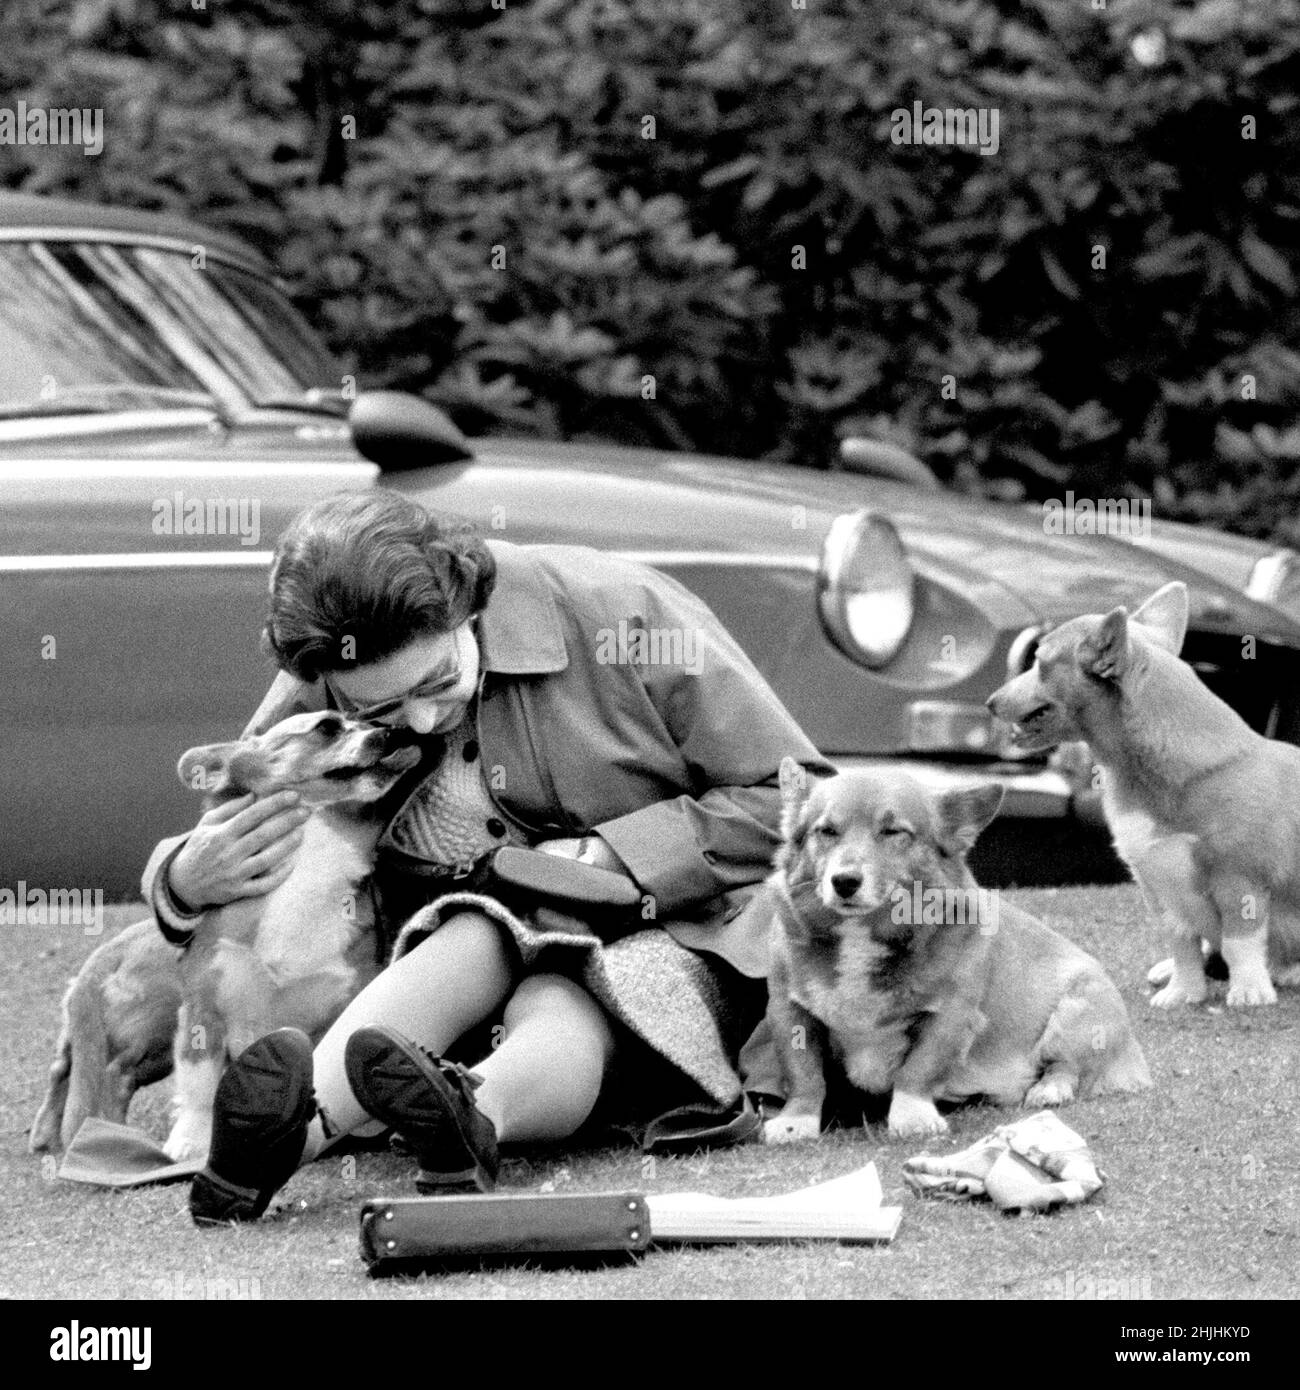 Lg Photo Picture Queen Elizabeth II With Corgi Dogs Royal Windsor Horse Show 